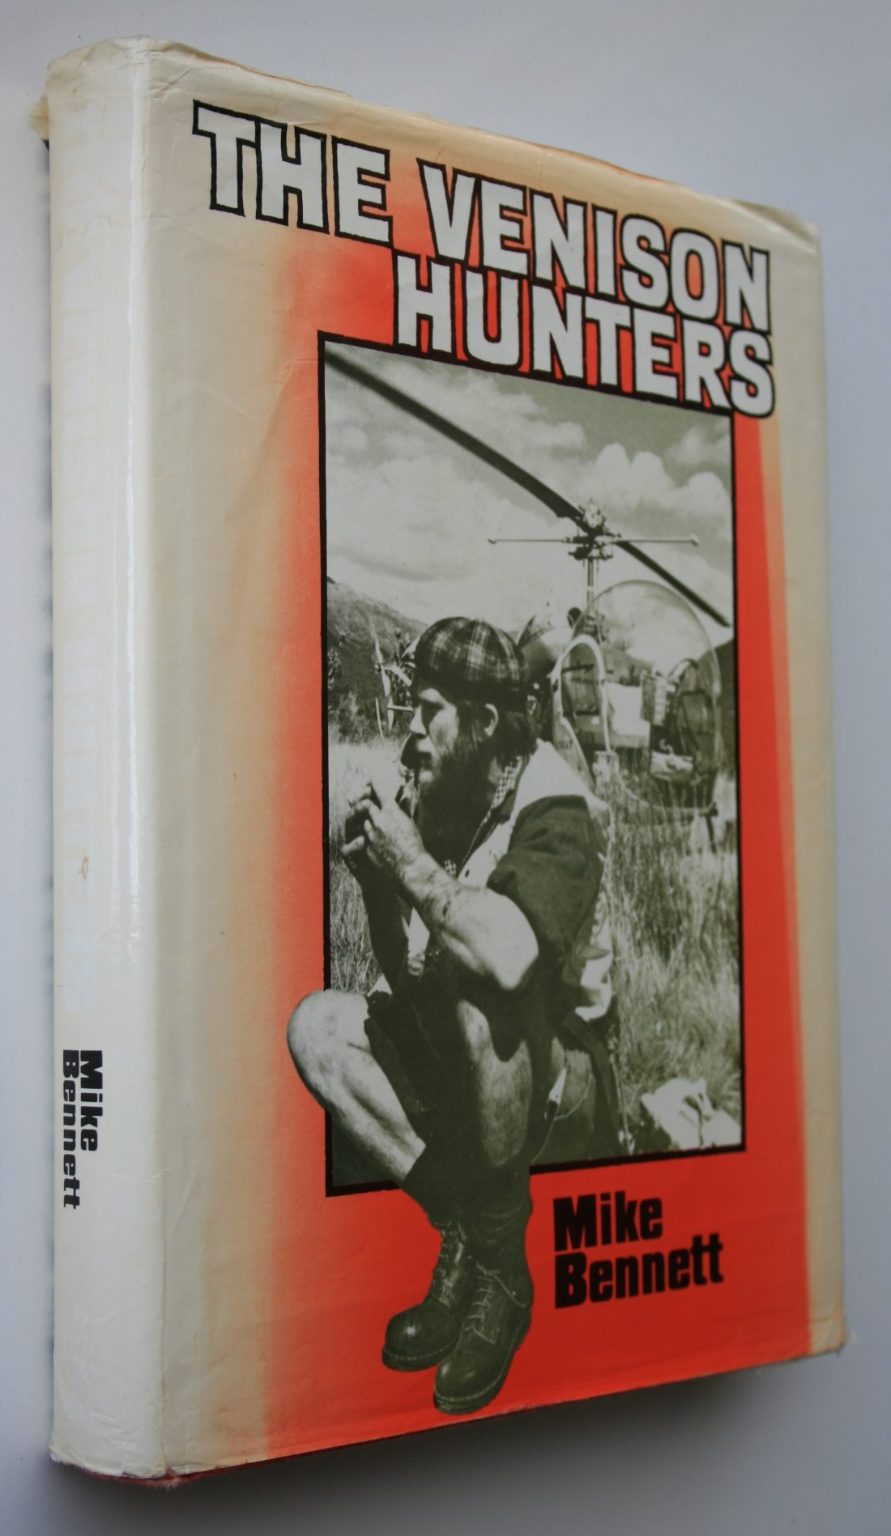 The Venison Hunters. First Edition Hardback By Mike Bennett. VERY SCARCE FIRST EDITION